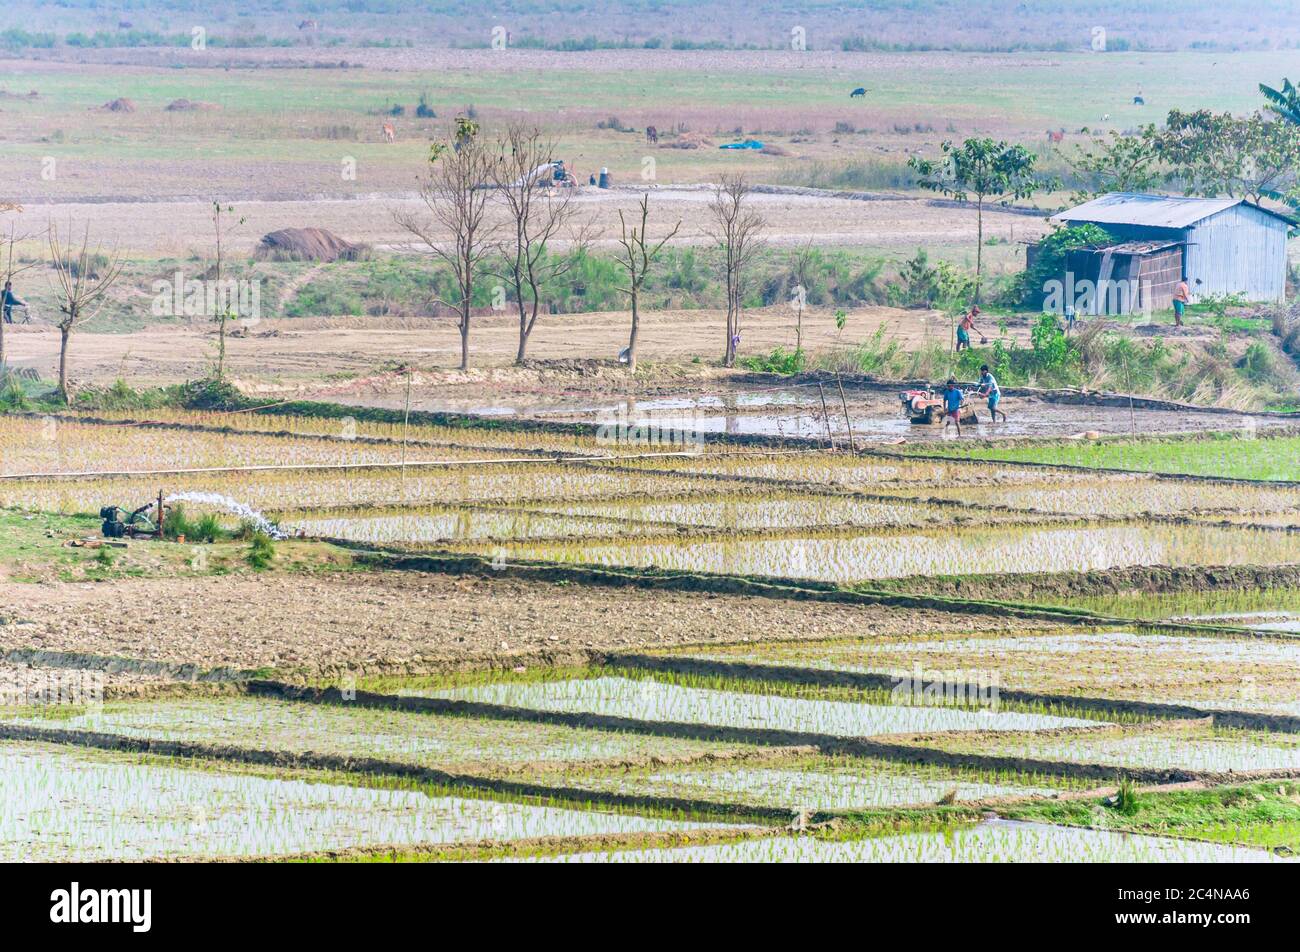 Landscape of Indian rice fields with labor people working. Stock Photo